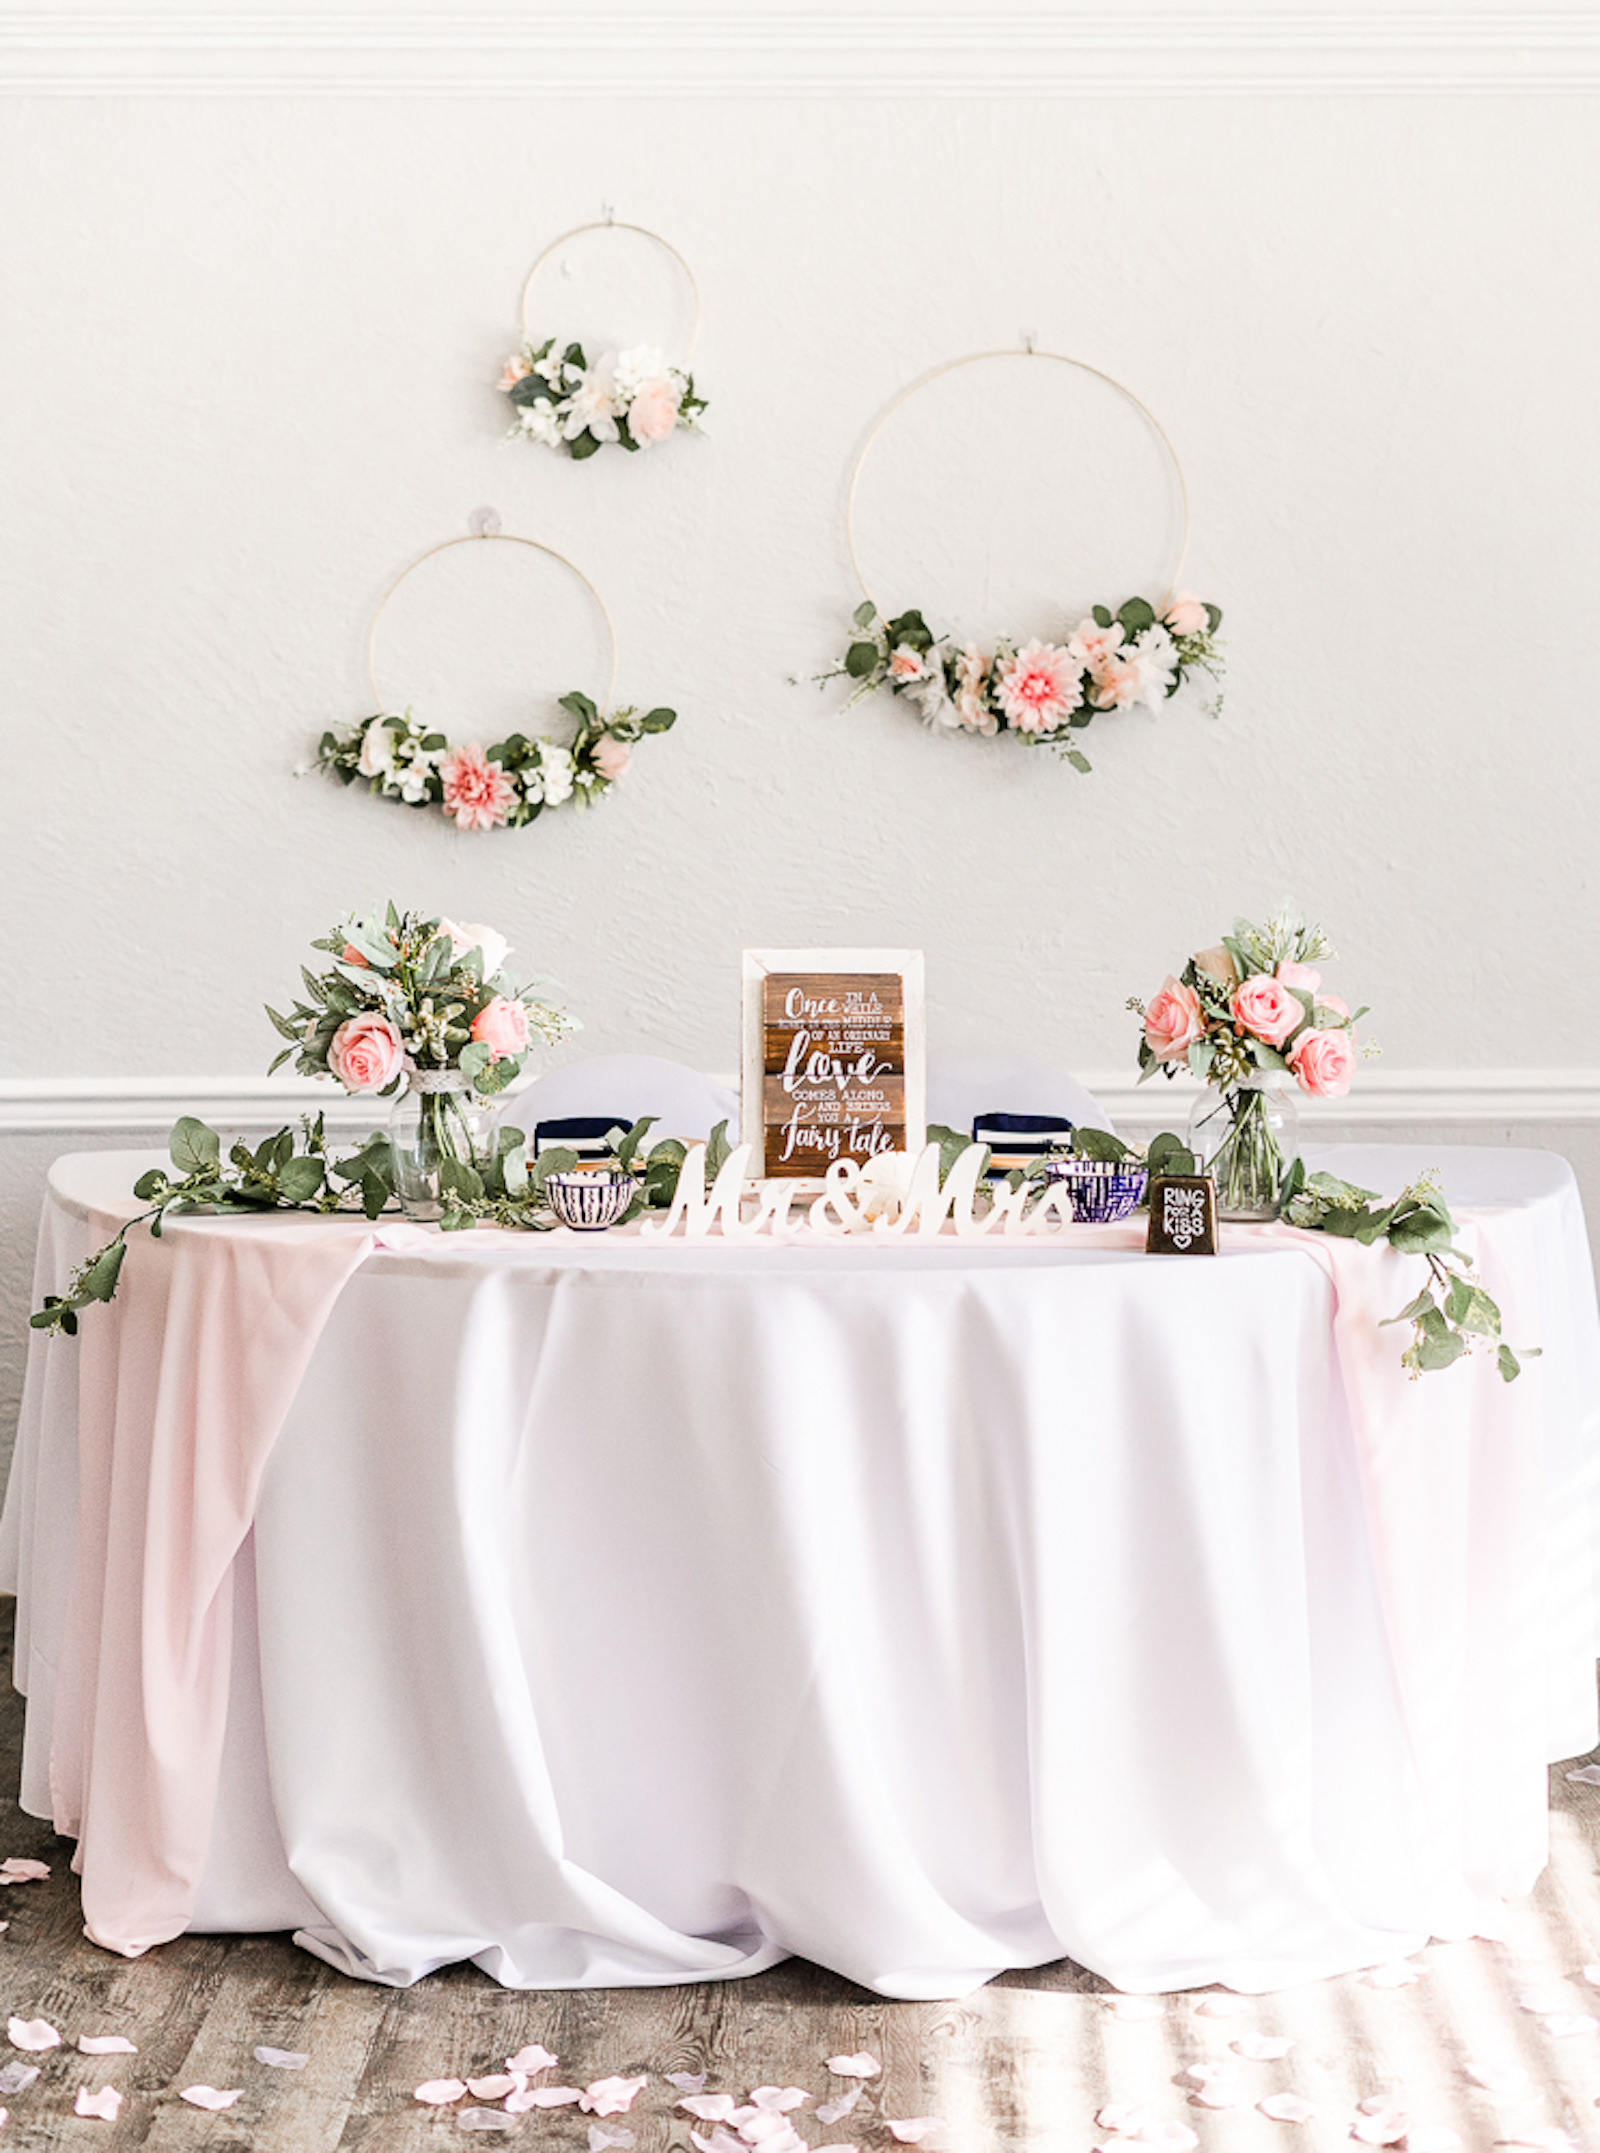 Blush Pink and White Wedding Inspiration | Wedding Sweetheart Table with Blush Pink Runner and Mr and Mrs Sign | Boho Floral Hoop with Blush Pink and White Flowers and Greenery Wedding Decor